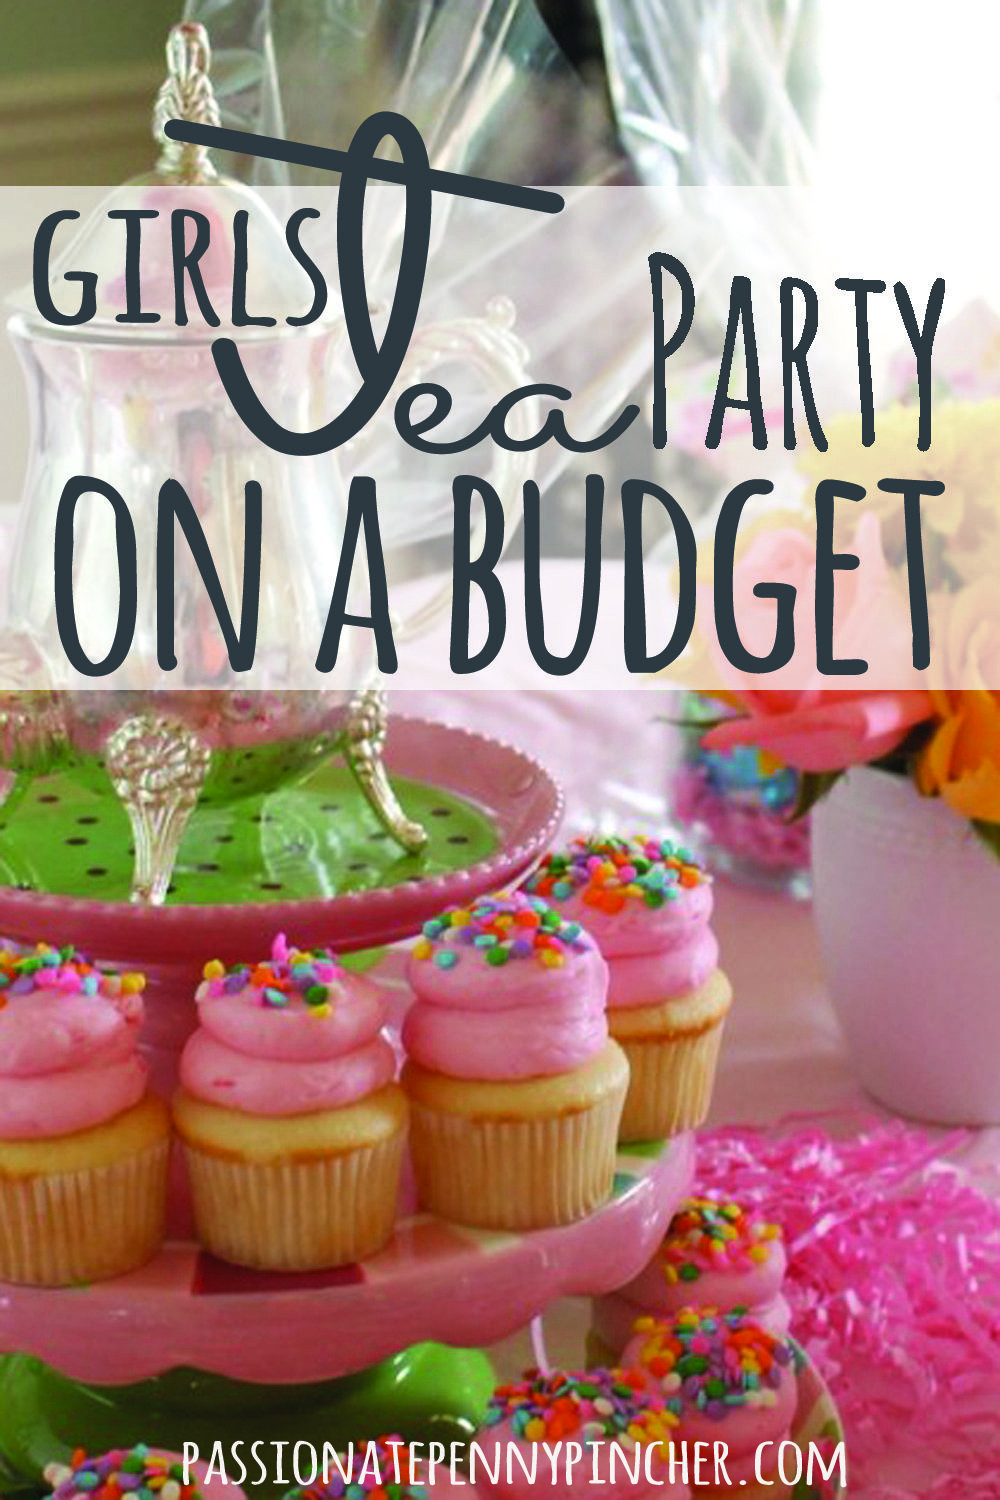 Tea Party Ideas For Toddlers
 Girls Tea Party A Bud